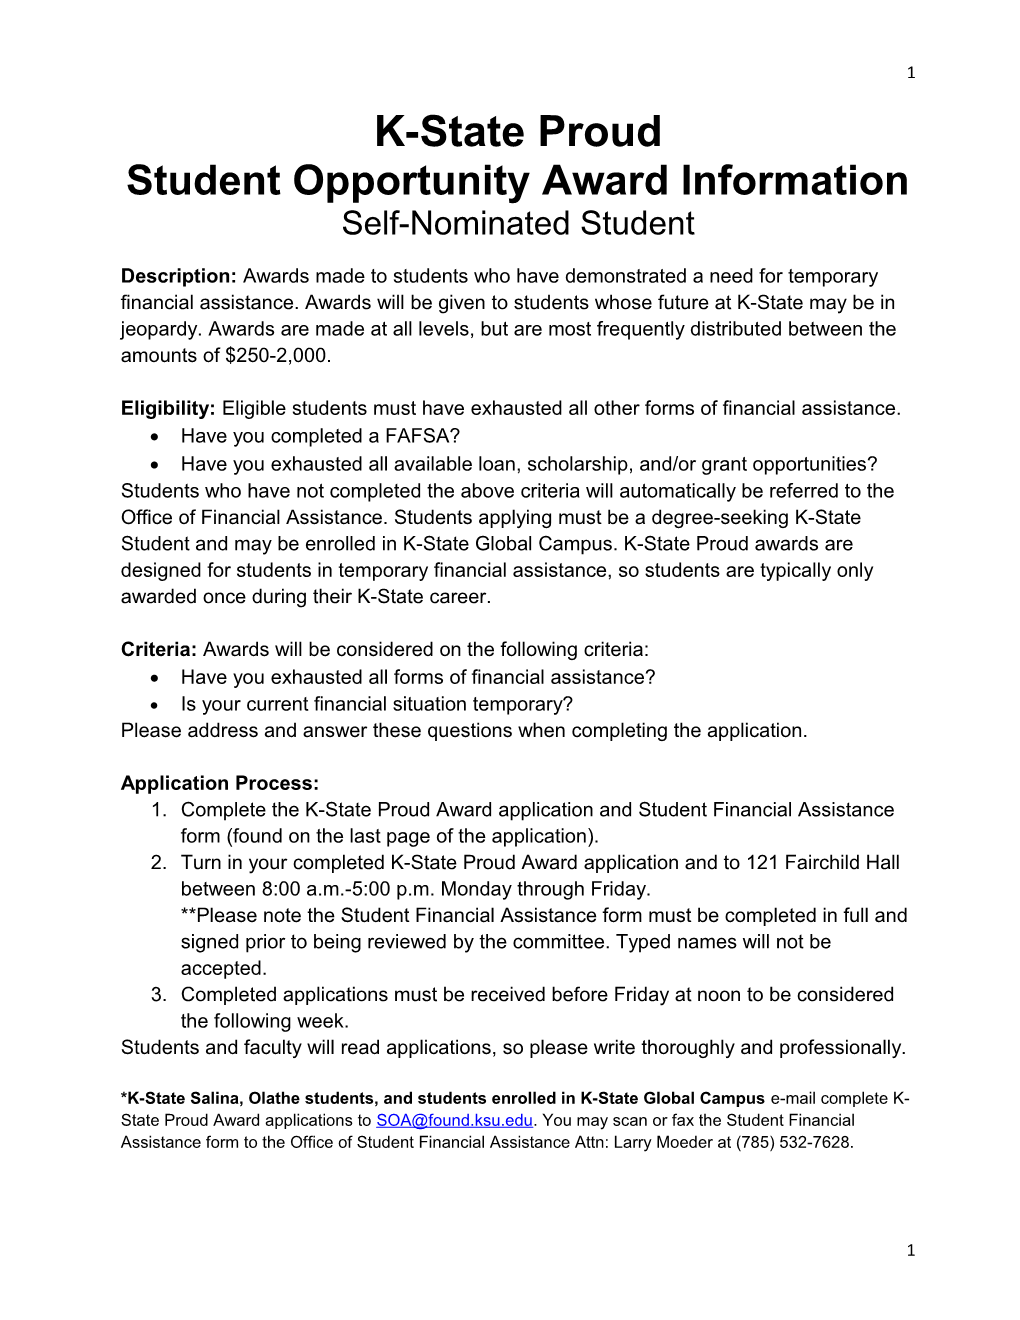 Student Opportunity Award Information